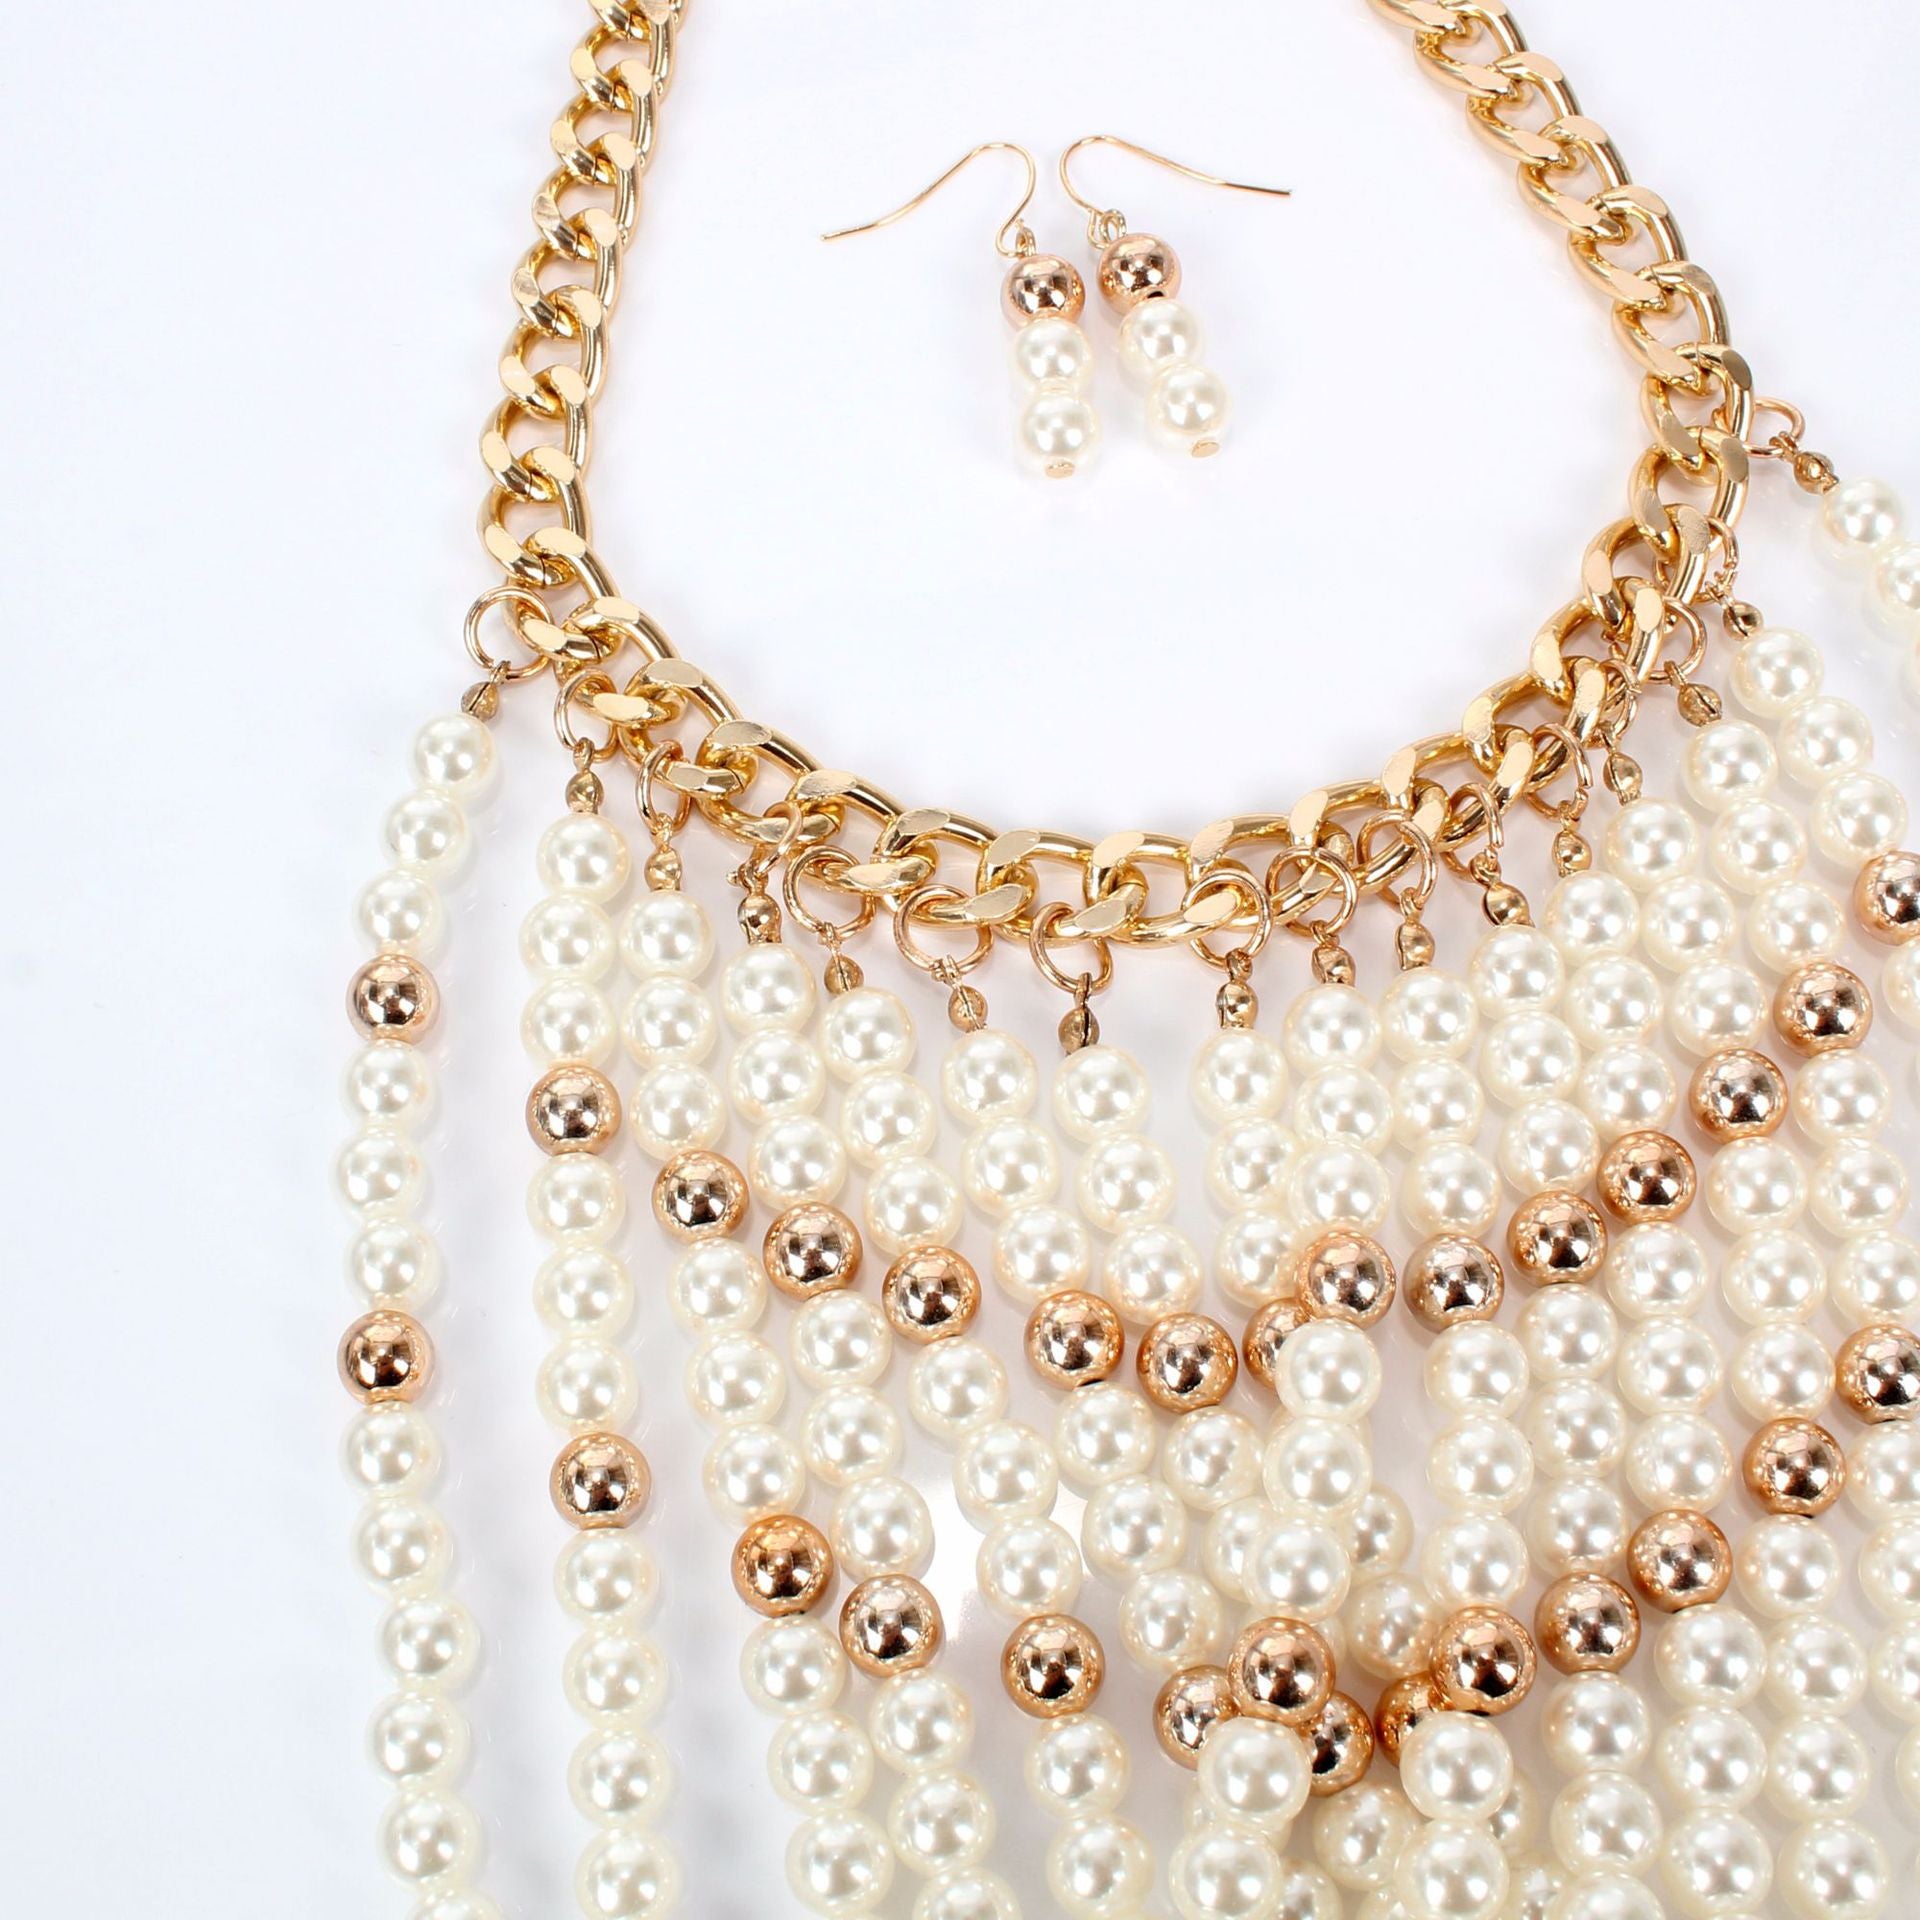 Statement Lady Rope Multi-Layered Pearl Necklace & Earring Set